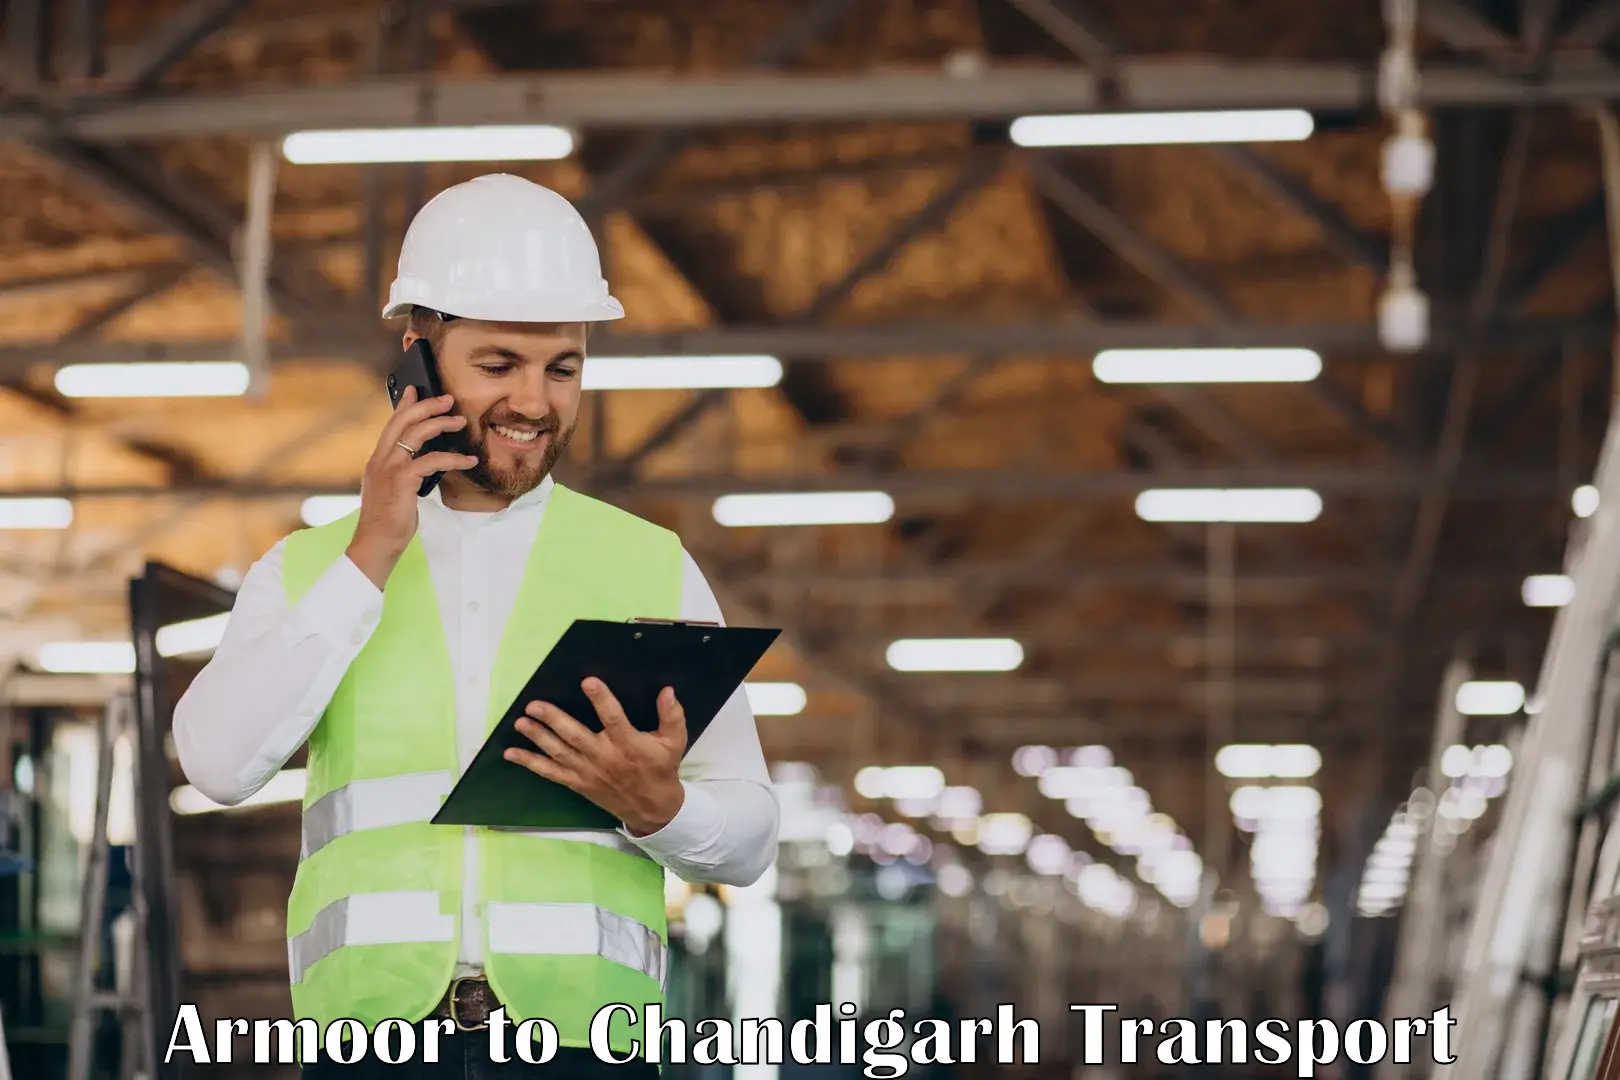 Part load transport service in India Armoor to Chandigarh